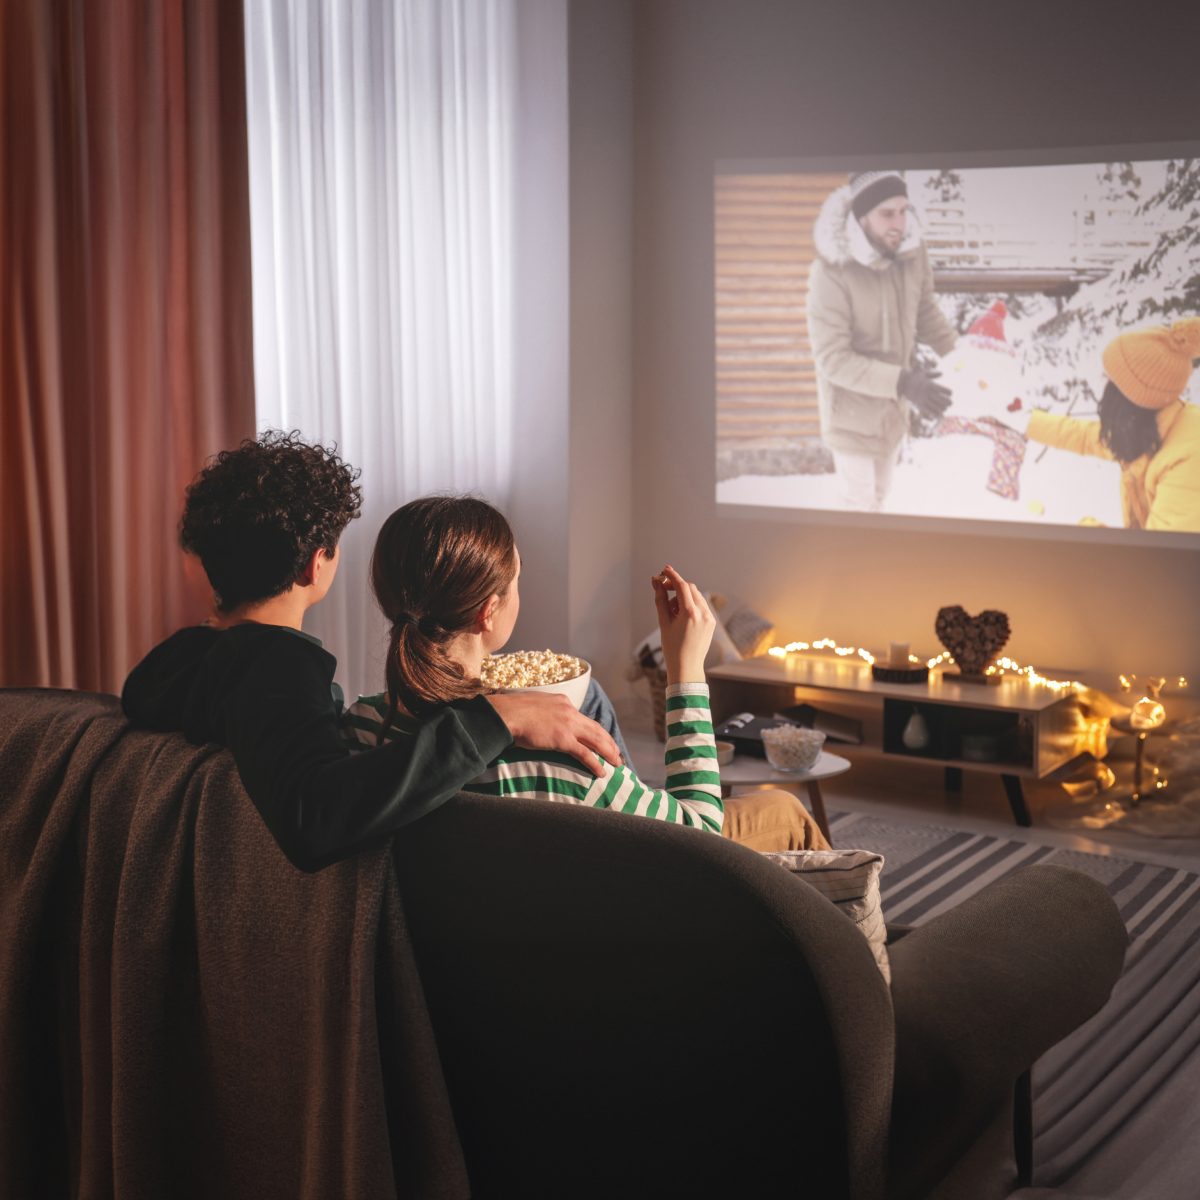 Romantic Movie Night with XGIMI Projectors: A Perfect Valentine's Day Date